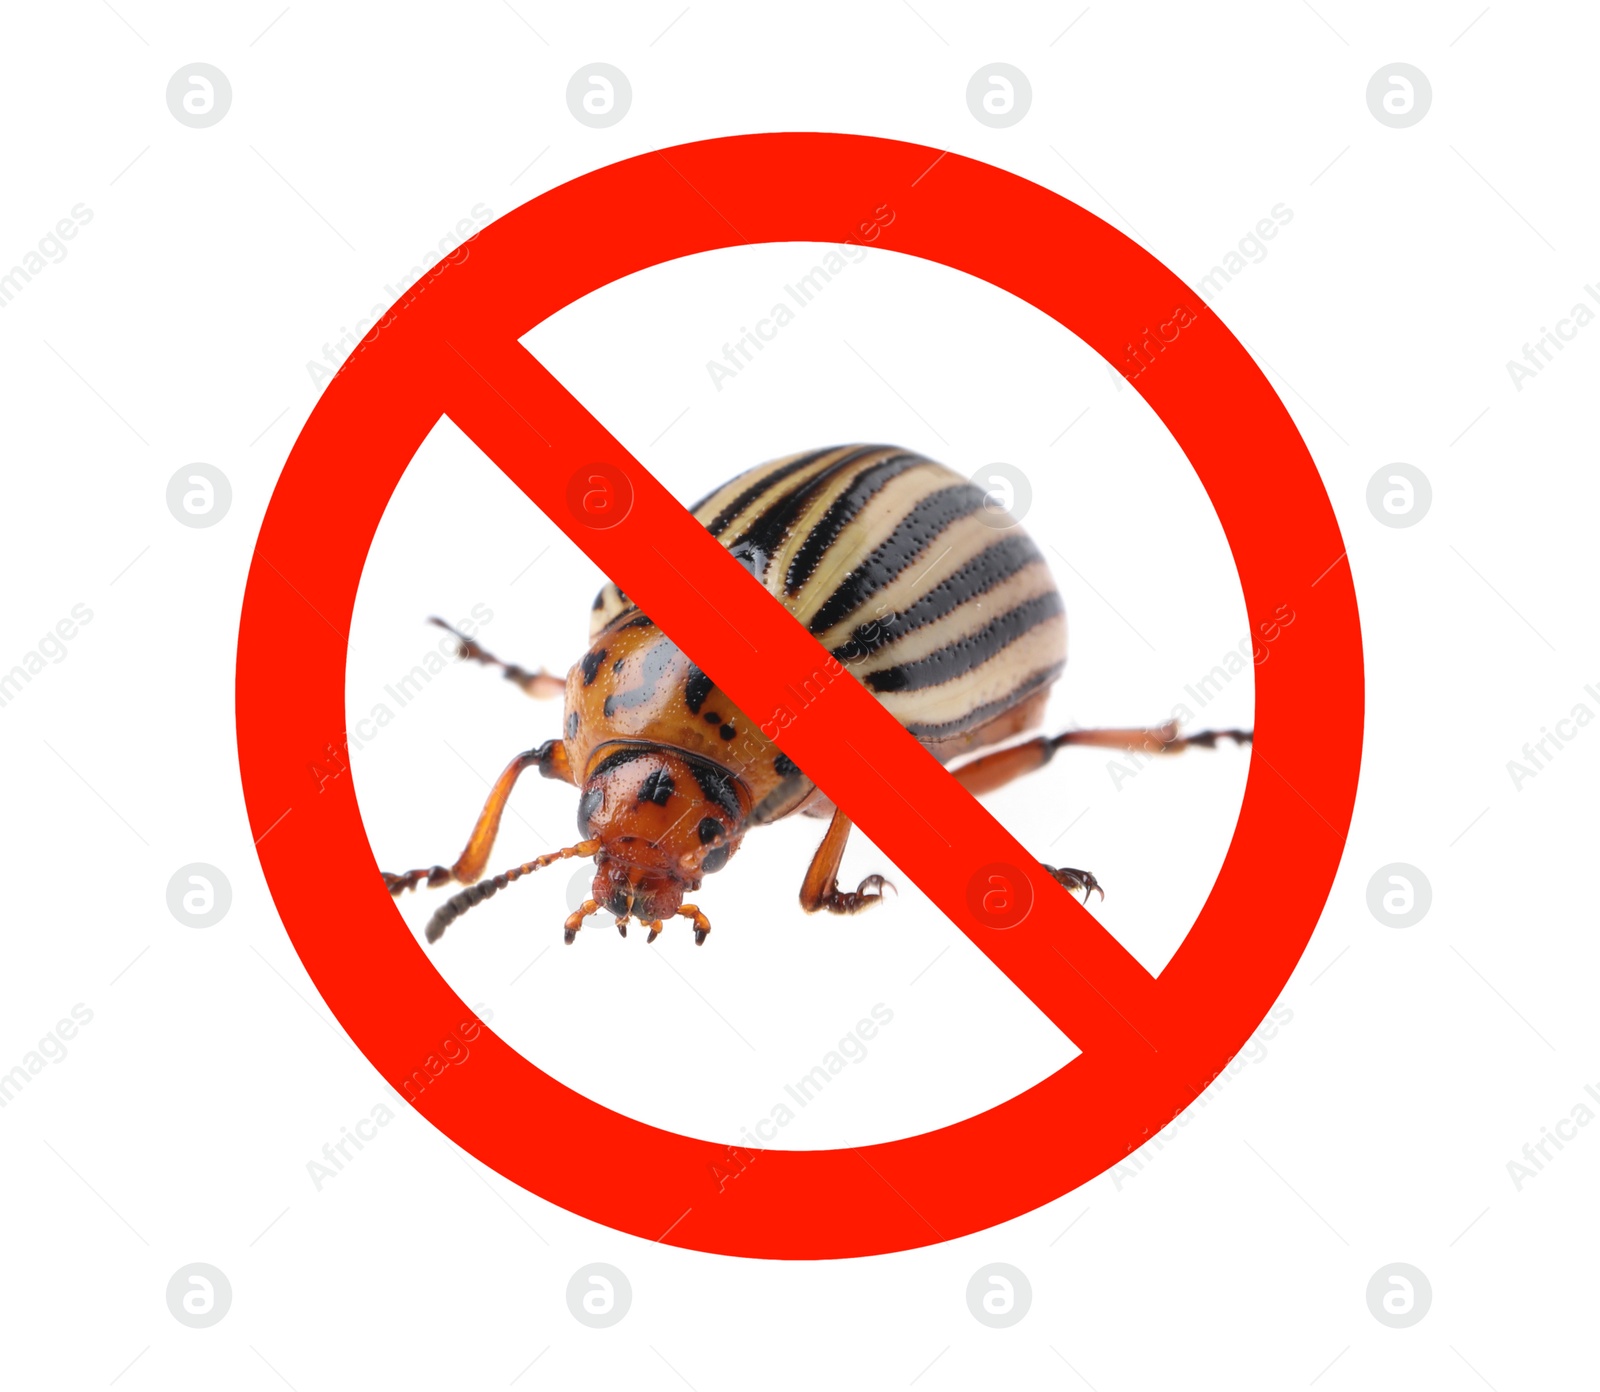 Image of Colorado potato beetle and red prohibition sign on white background